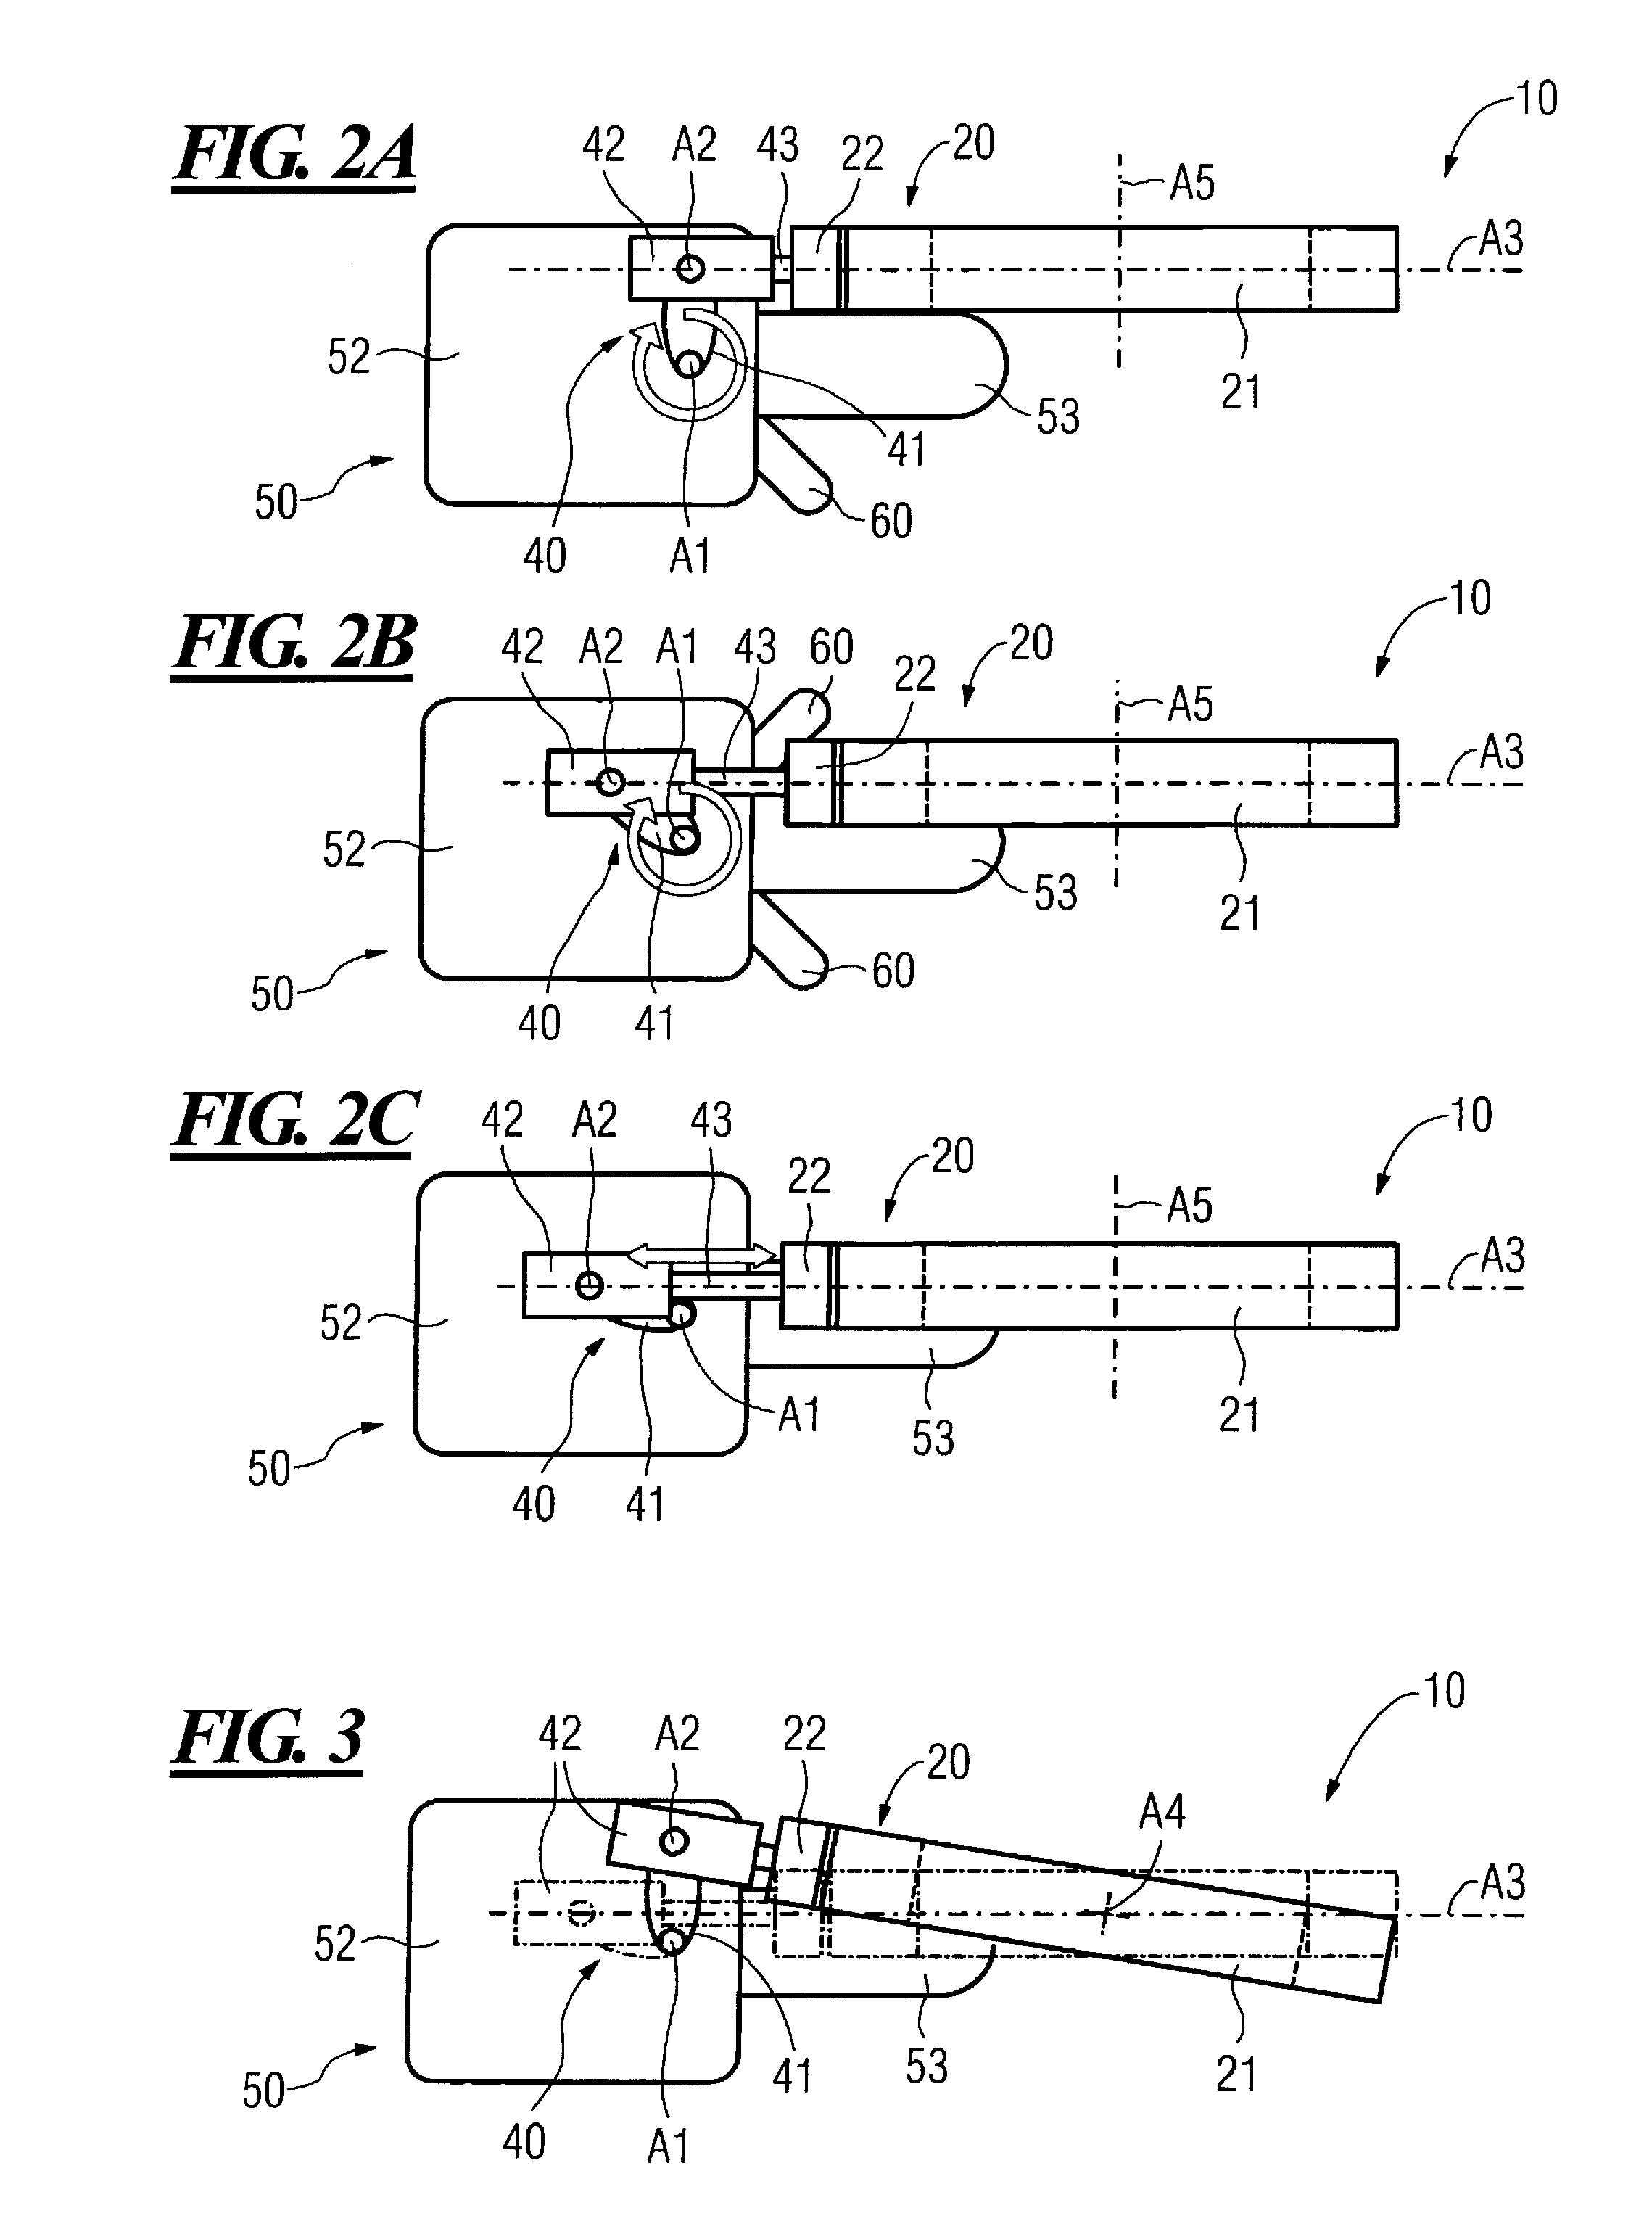 X-ray recording device with an X-ray detector and an X-ray emitter